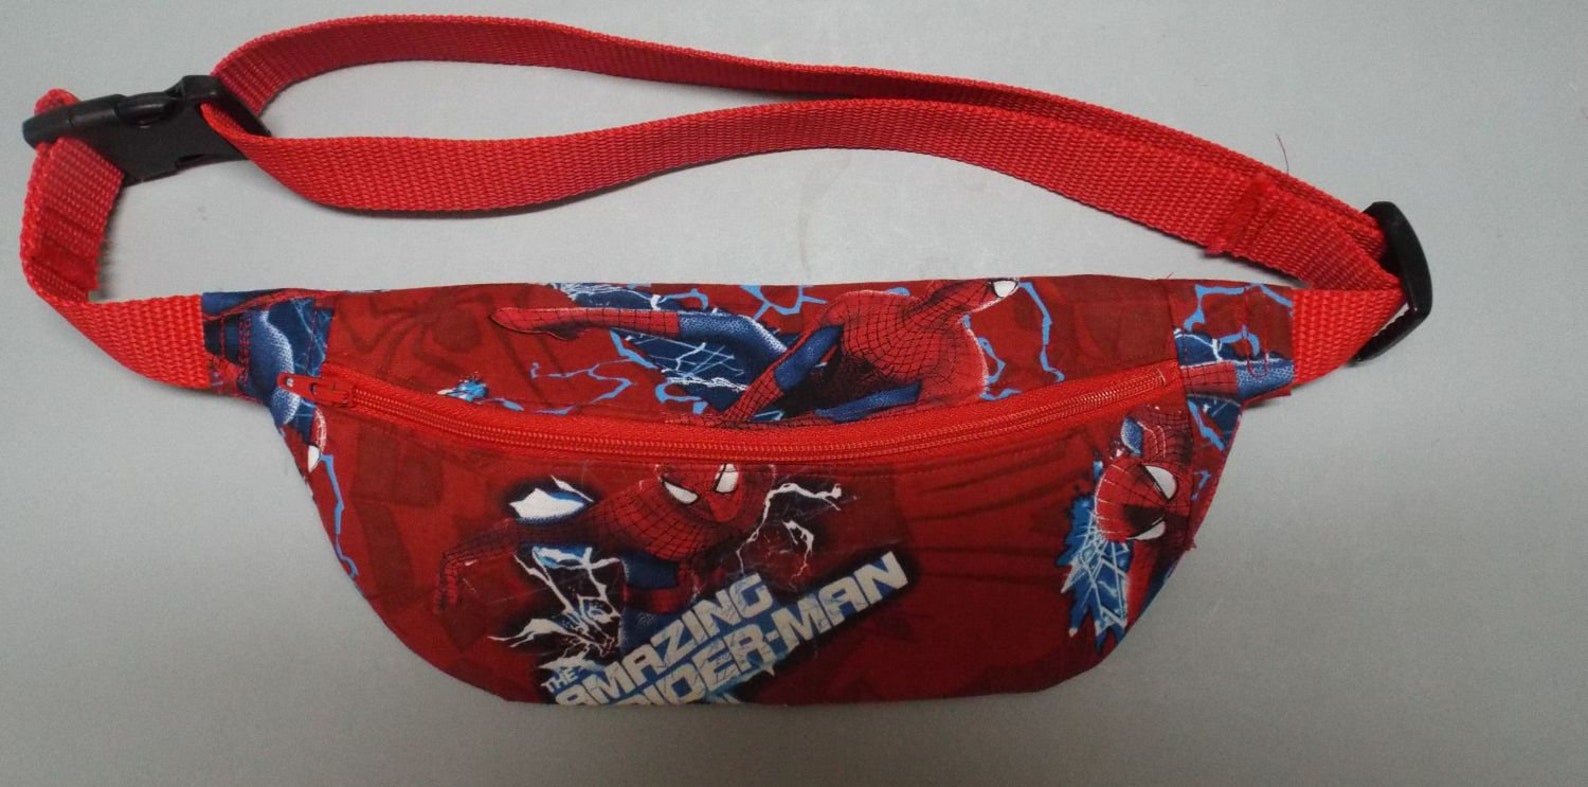 Kids Fanny Pack Belted Waist Bag 2 Spiderman Fabric Choices | Etsy